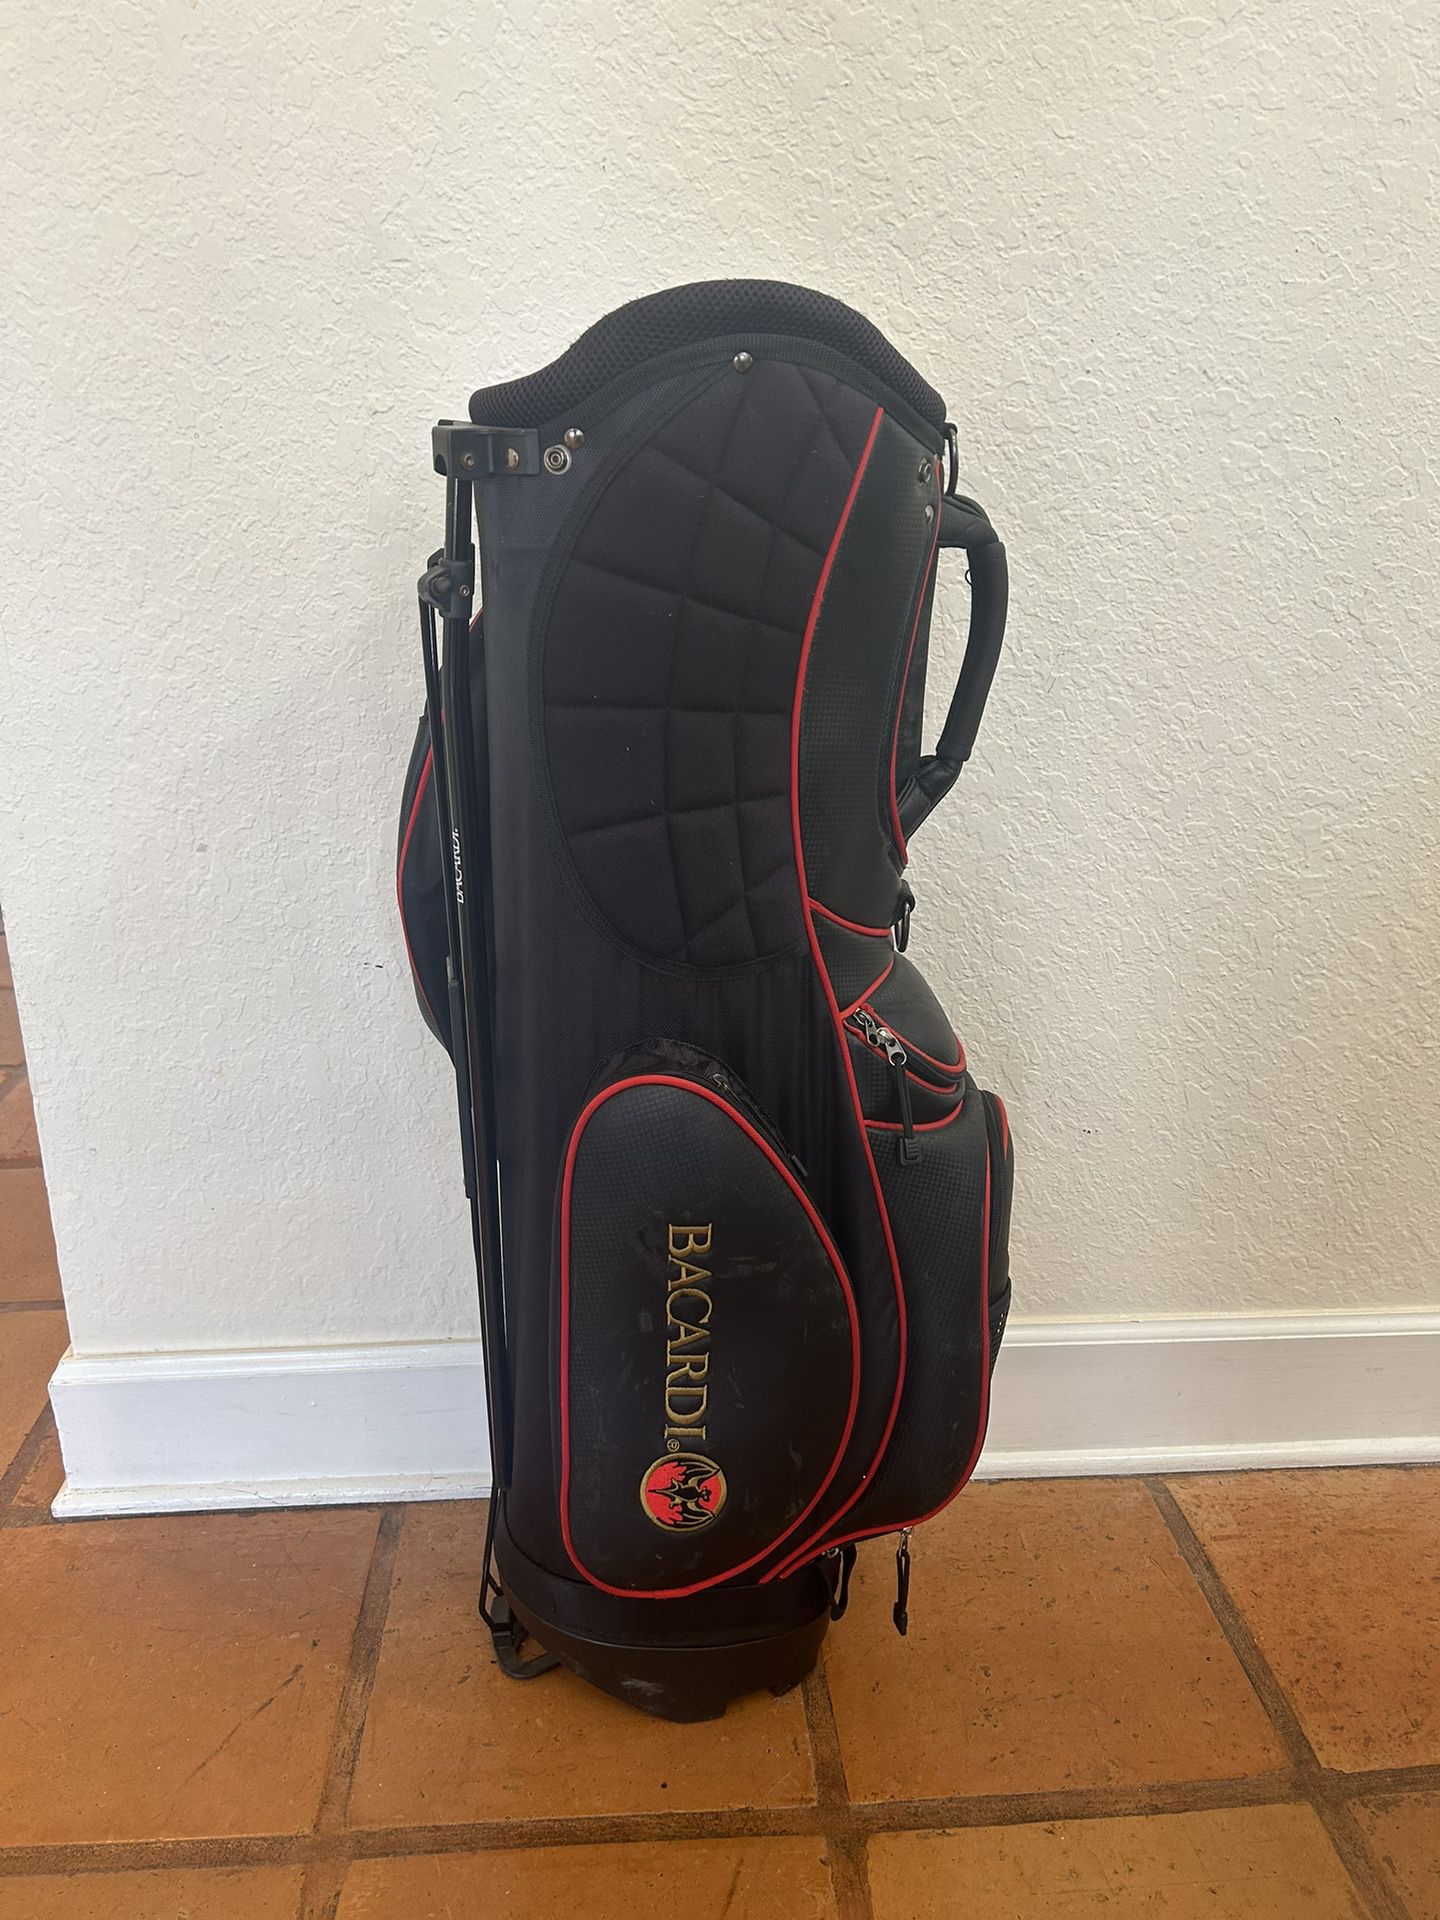 Burberry golf bag first 50 takes it for Sale in Jupiter, FL - OfferUp